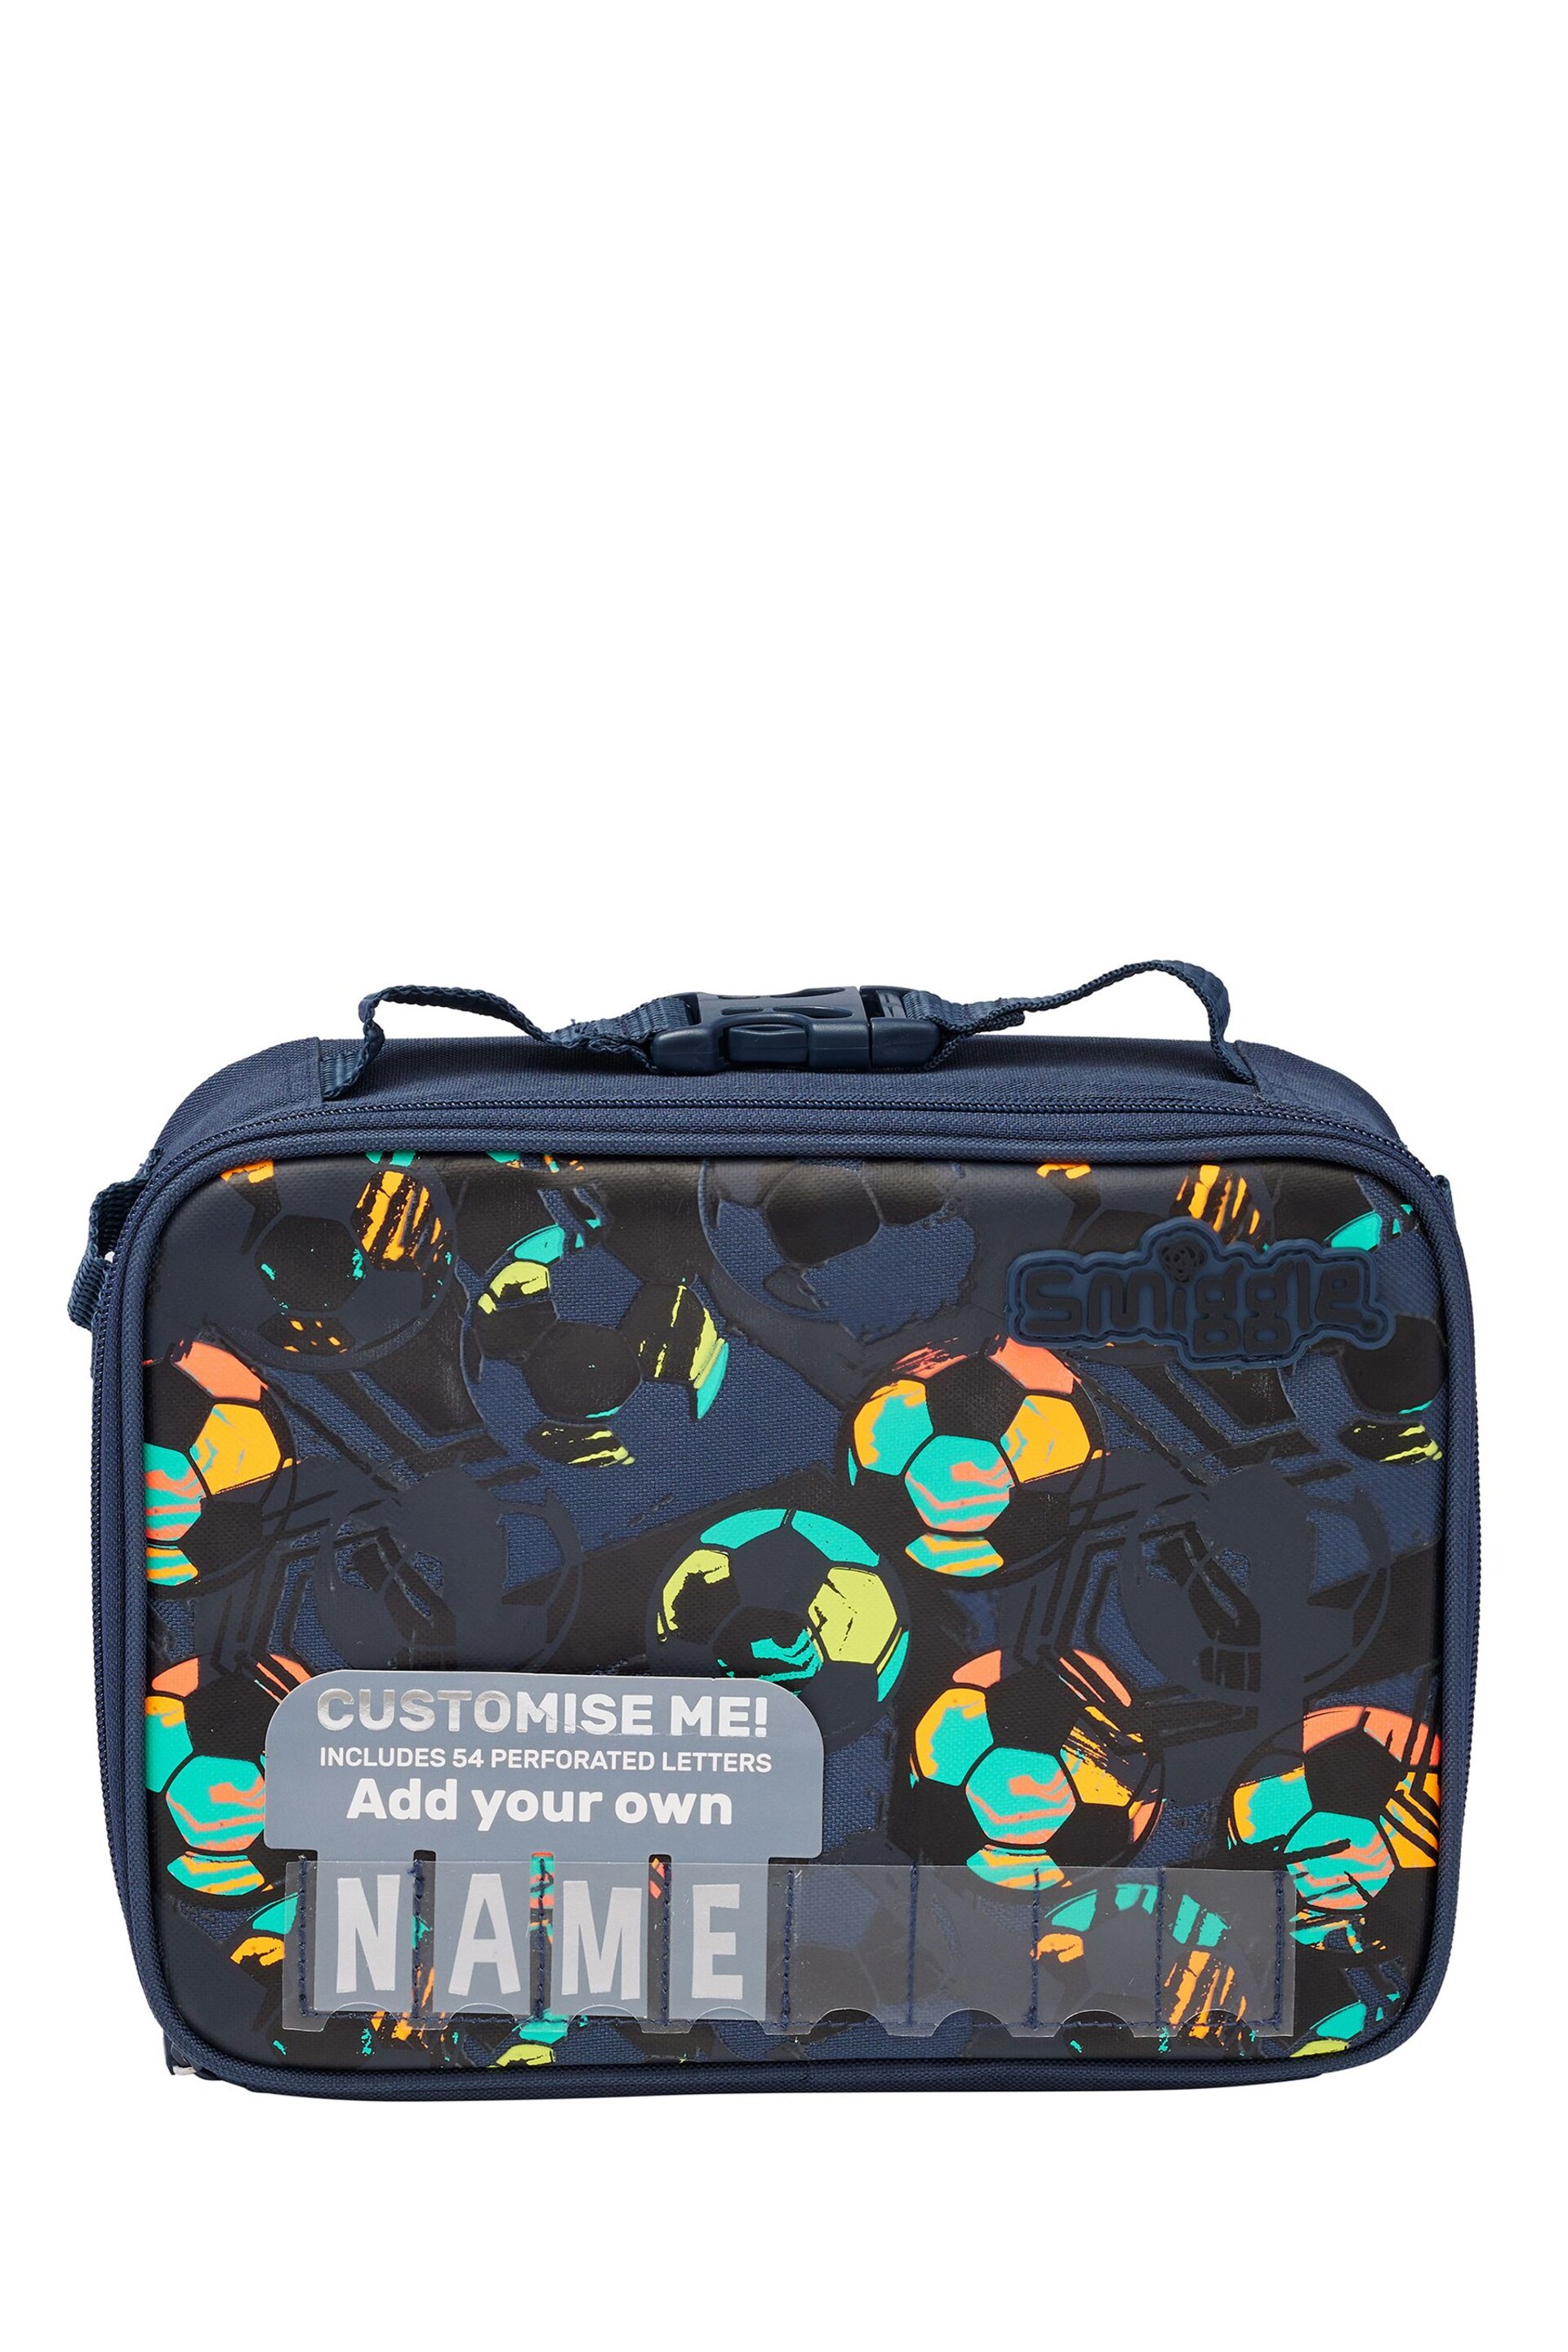 Smiggle Black Wild Side Square Attach Id Lunch Box - Image 1 of 2